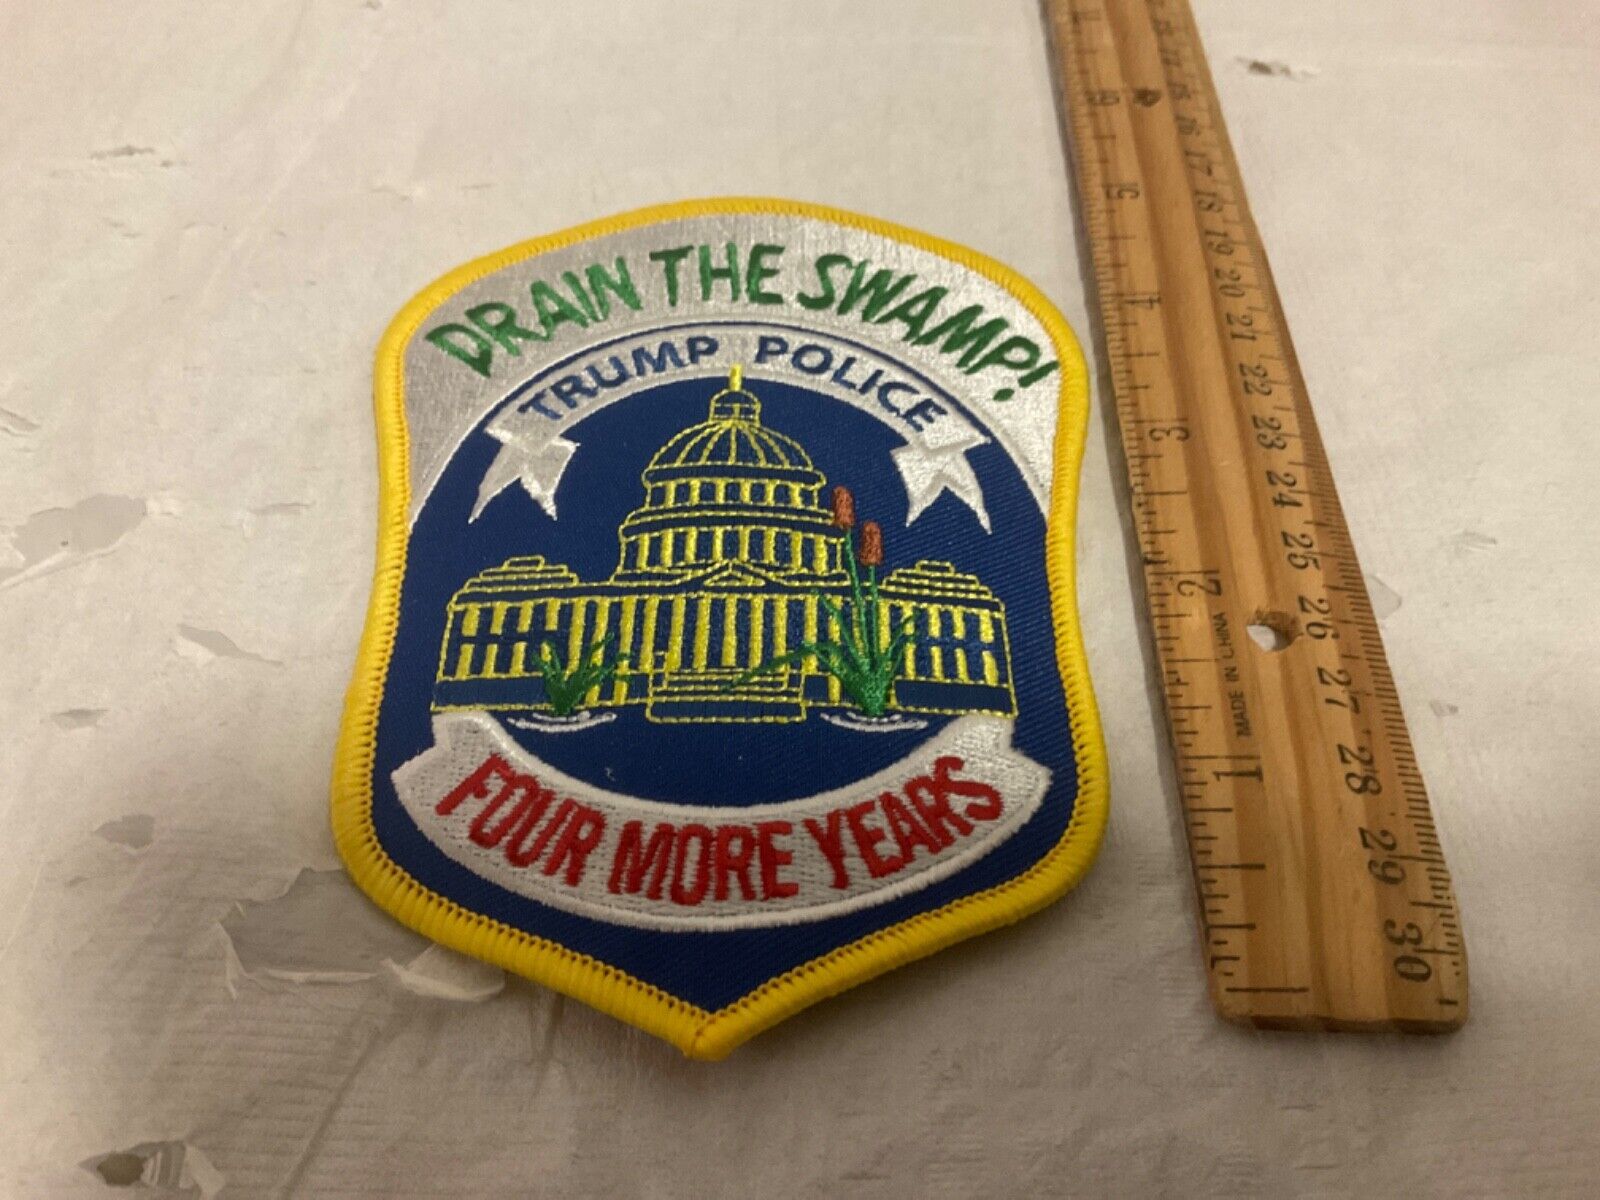 Trump Police Drain The Swamp 4 more years patch  collectible election 2024